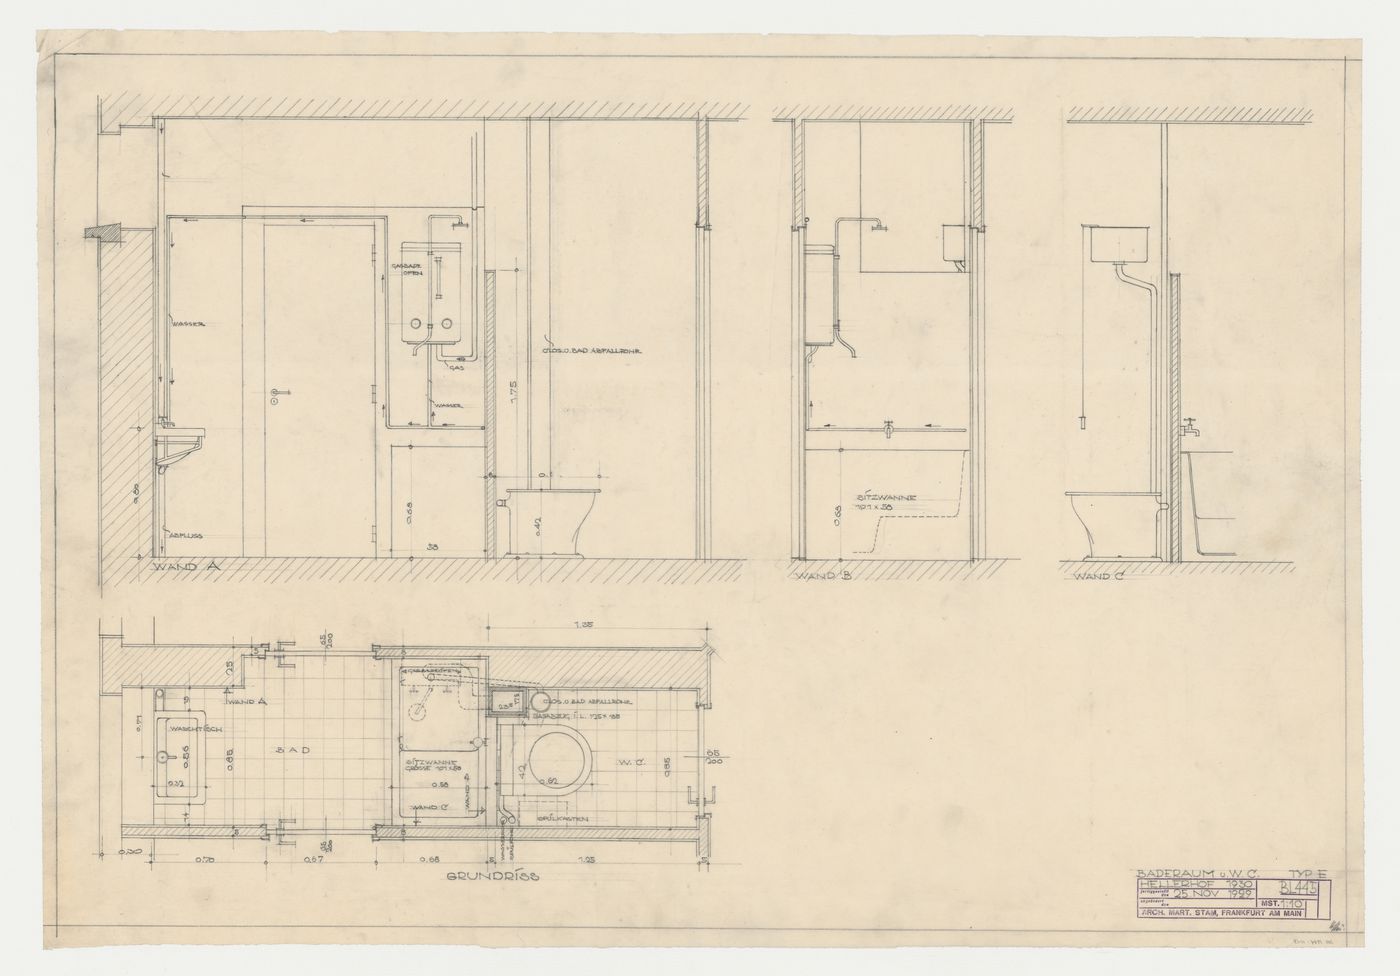 Plan and sections for a type E bathroom and lavatory for a housing unit, Hellerhof Housing Estate, Frankfurt am Main, Germany